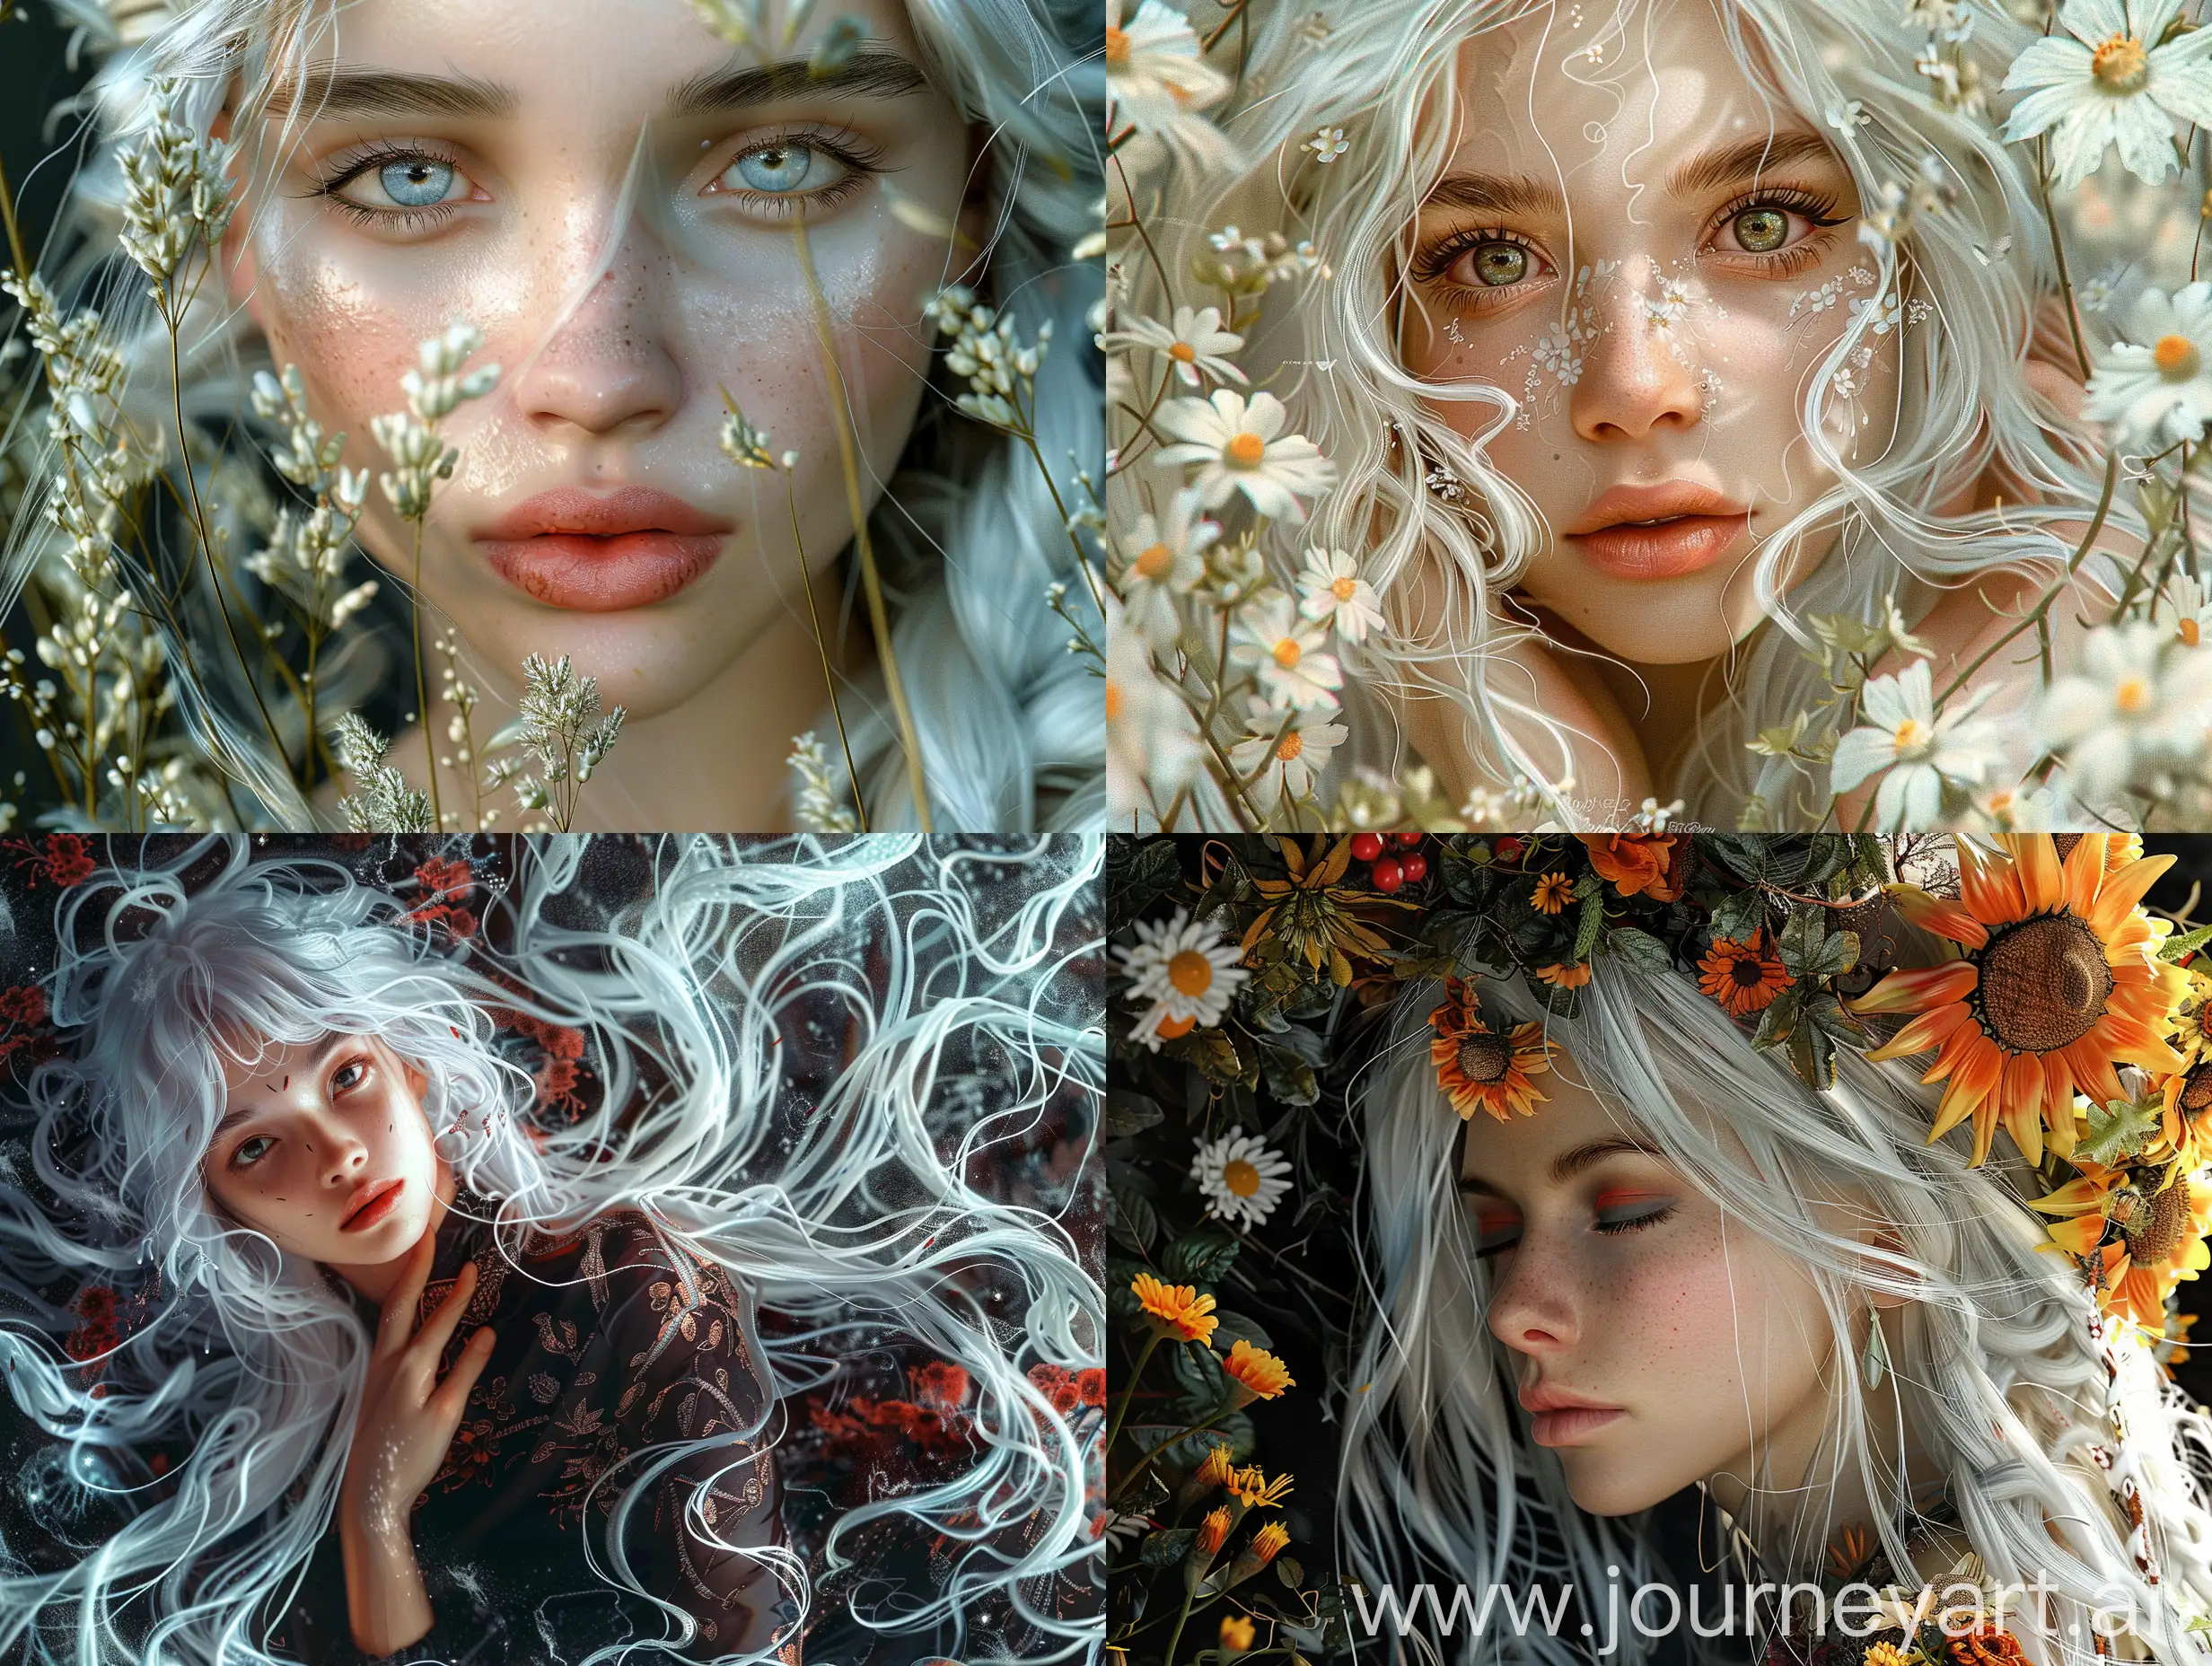 Beautiful-Woman-with-White-Hair-Surrounded-by-Mki-and-Agrostemma-Flowers-in-Bohemian-Style-Illustration